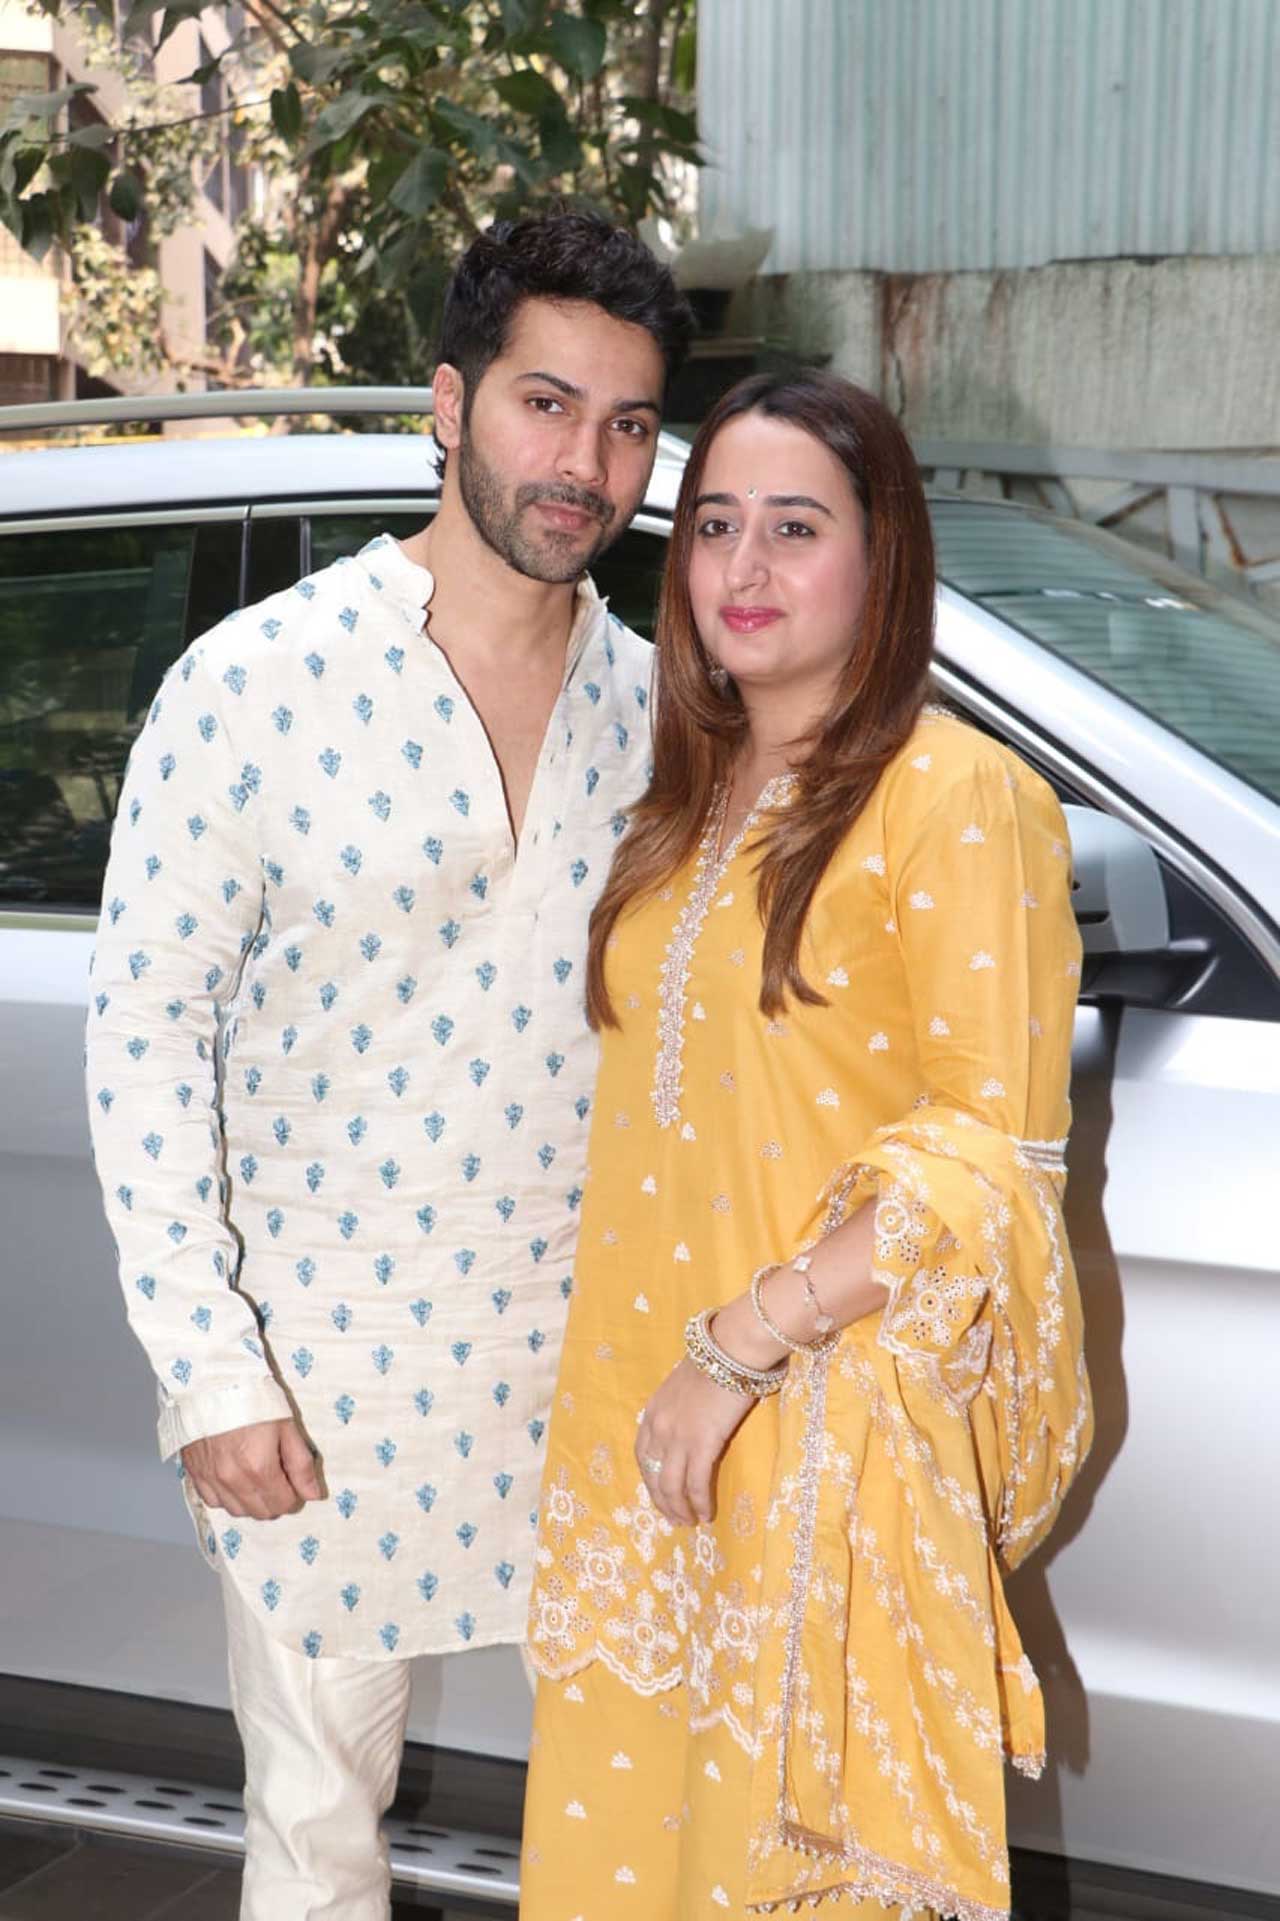 Varun Dhawan and Natasha Dalal looked stunning. The couple complemented each other in traditional outfits and they smiled and giggled as they posed for the shutterbugs. The couple tied the knot in January 2021.